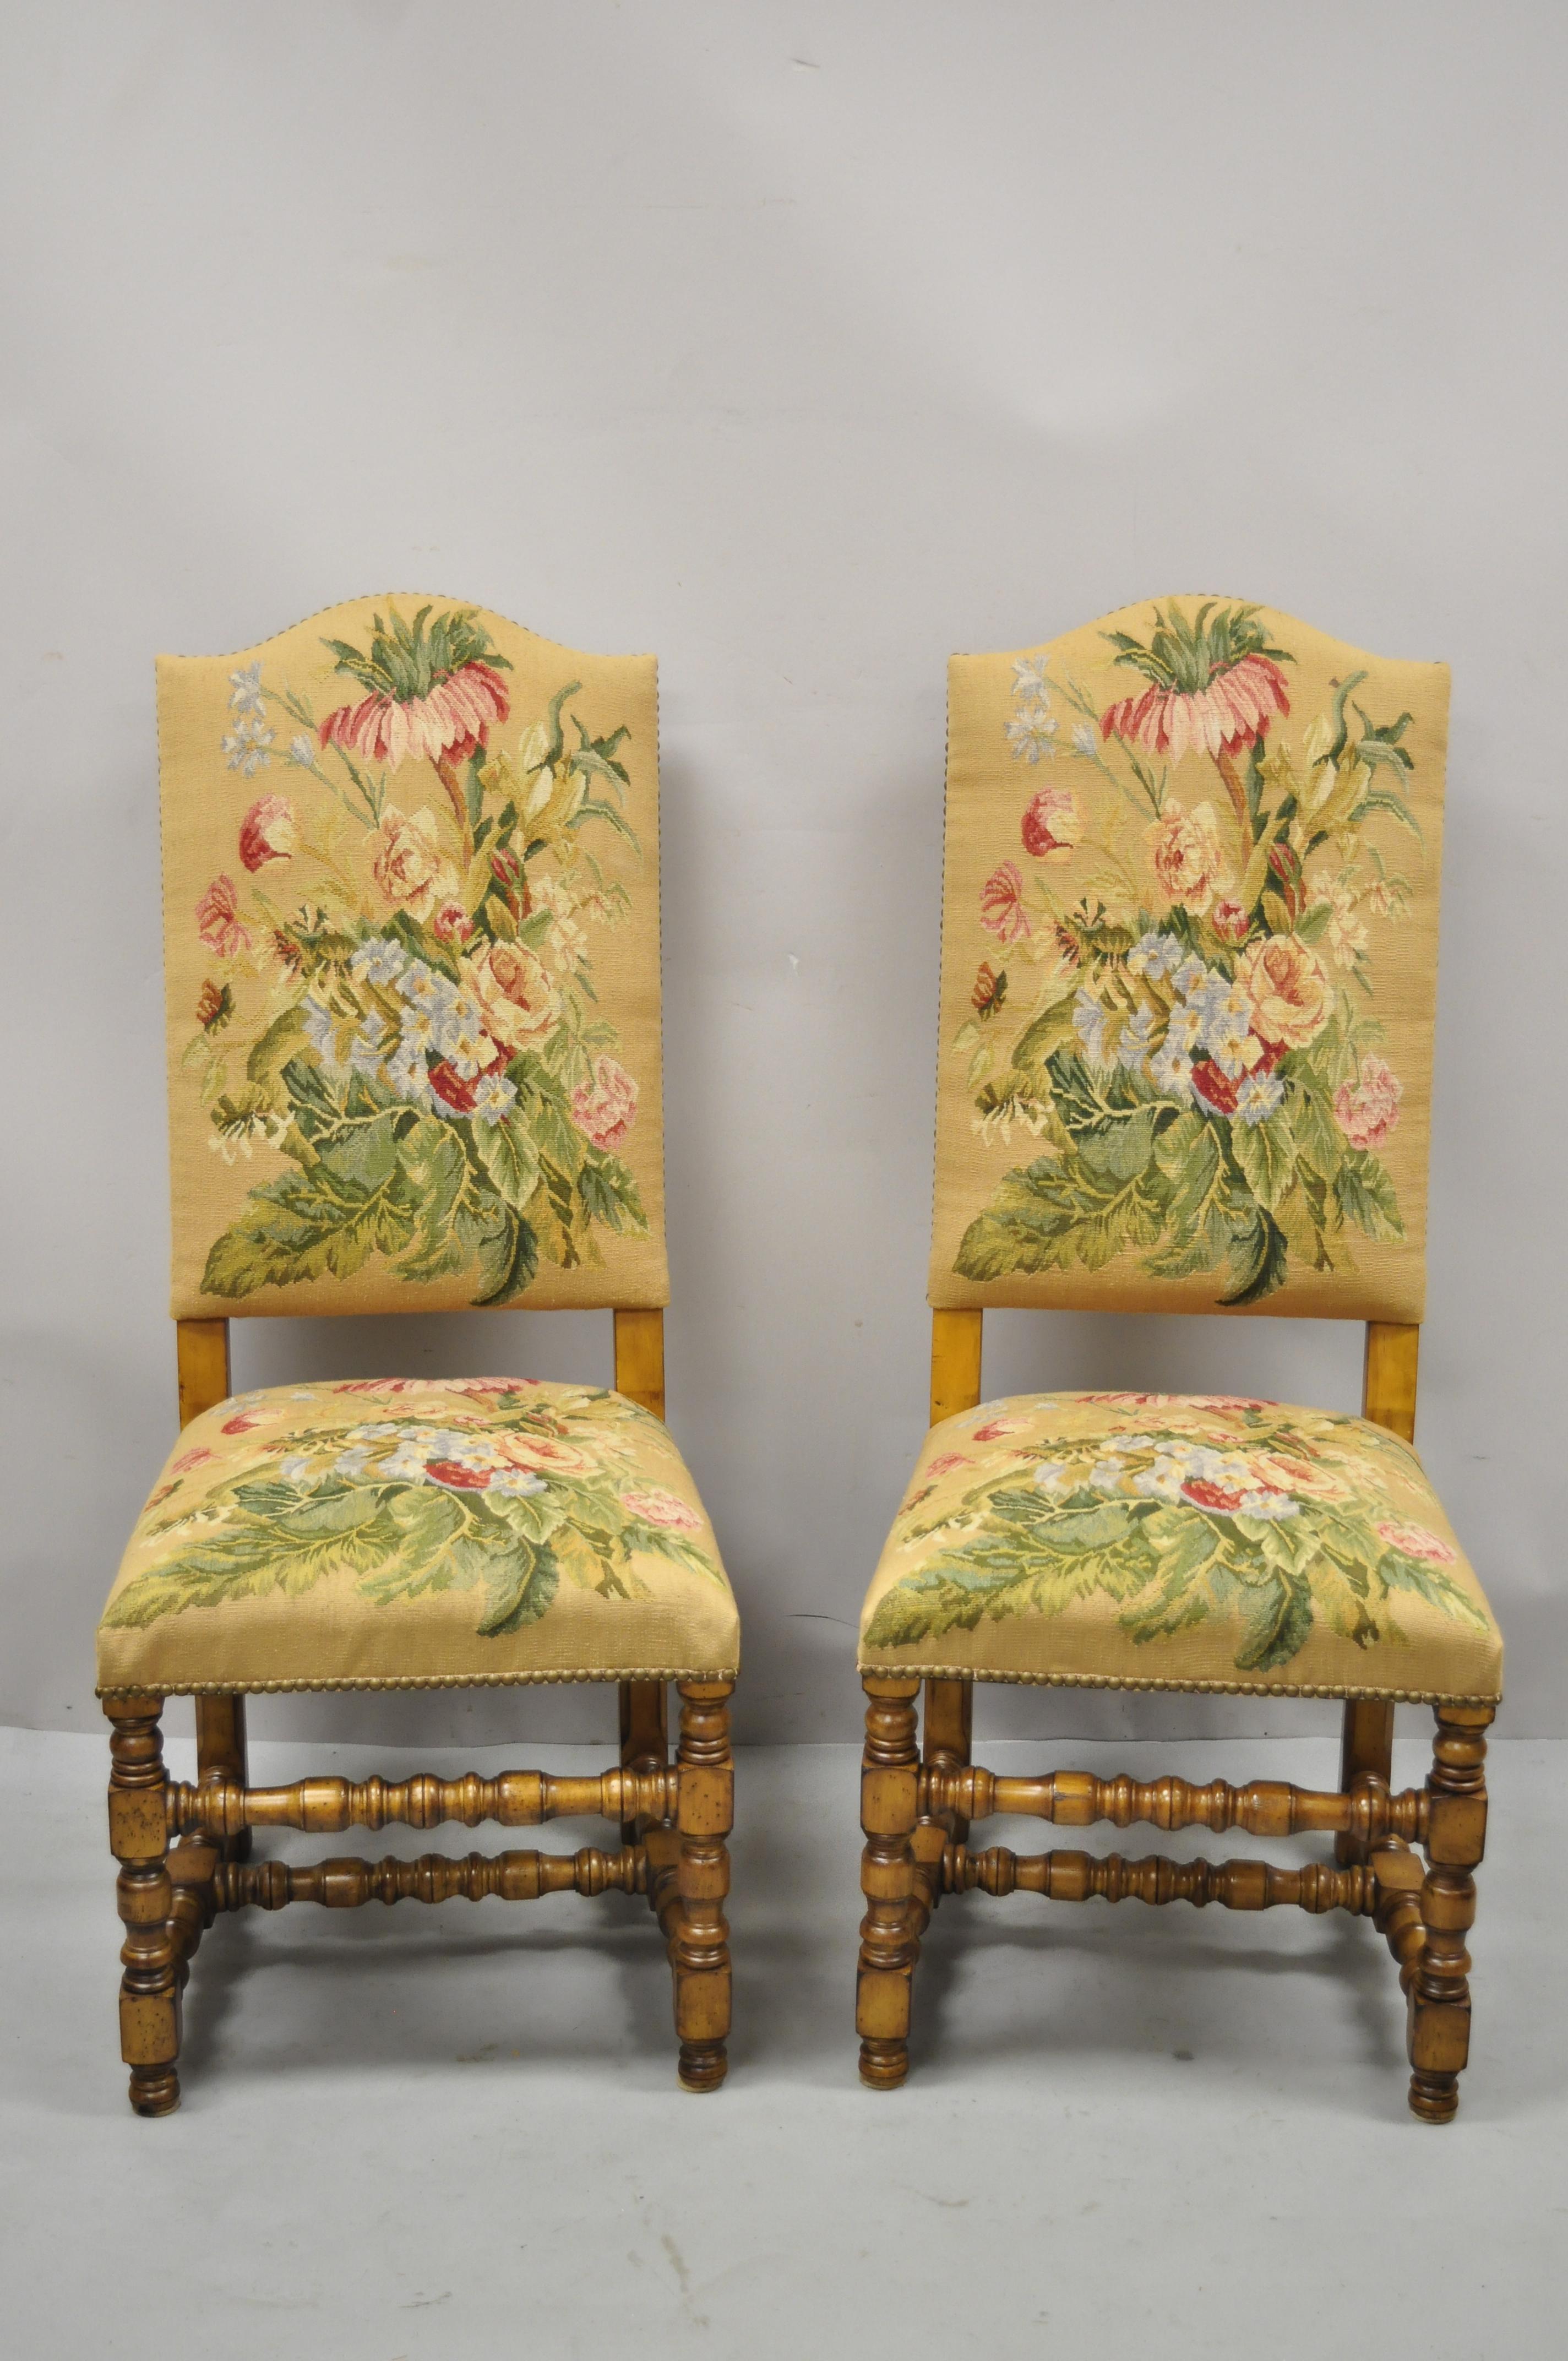 Antique English Jacobean Floral Needlepoint tall back dining side chairs - a pair. Item features floral needlepoint backs and seats, turn carved legs and stretchers, solid wood frames, beautiful wood grain, distressed finish, very nice antique pair,